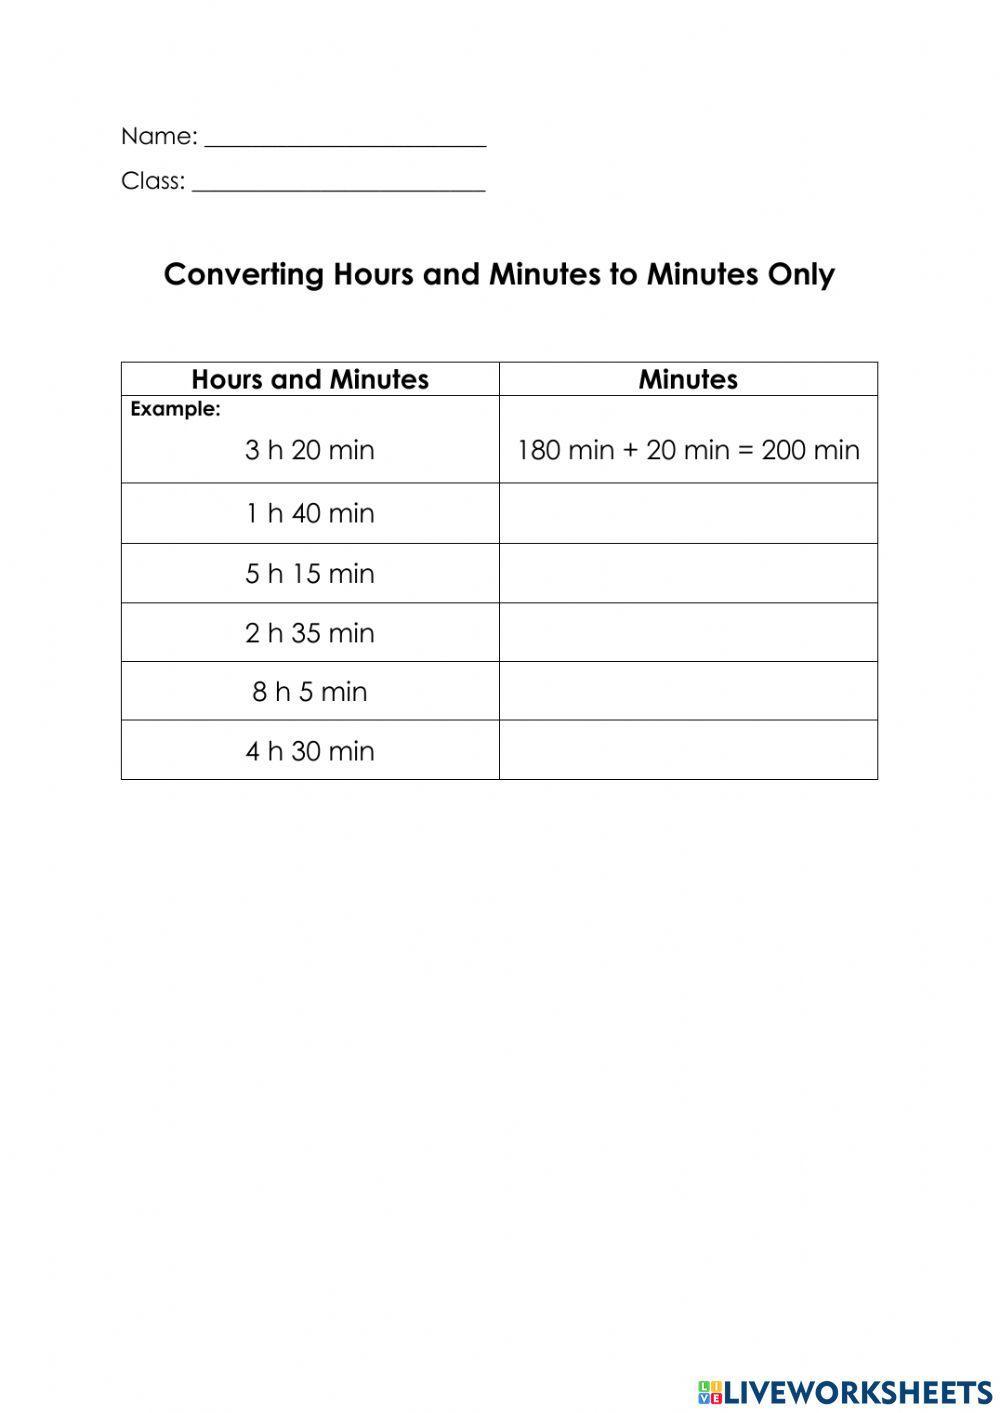 Converting Hours and Minutes to Minutes Only